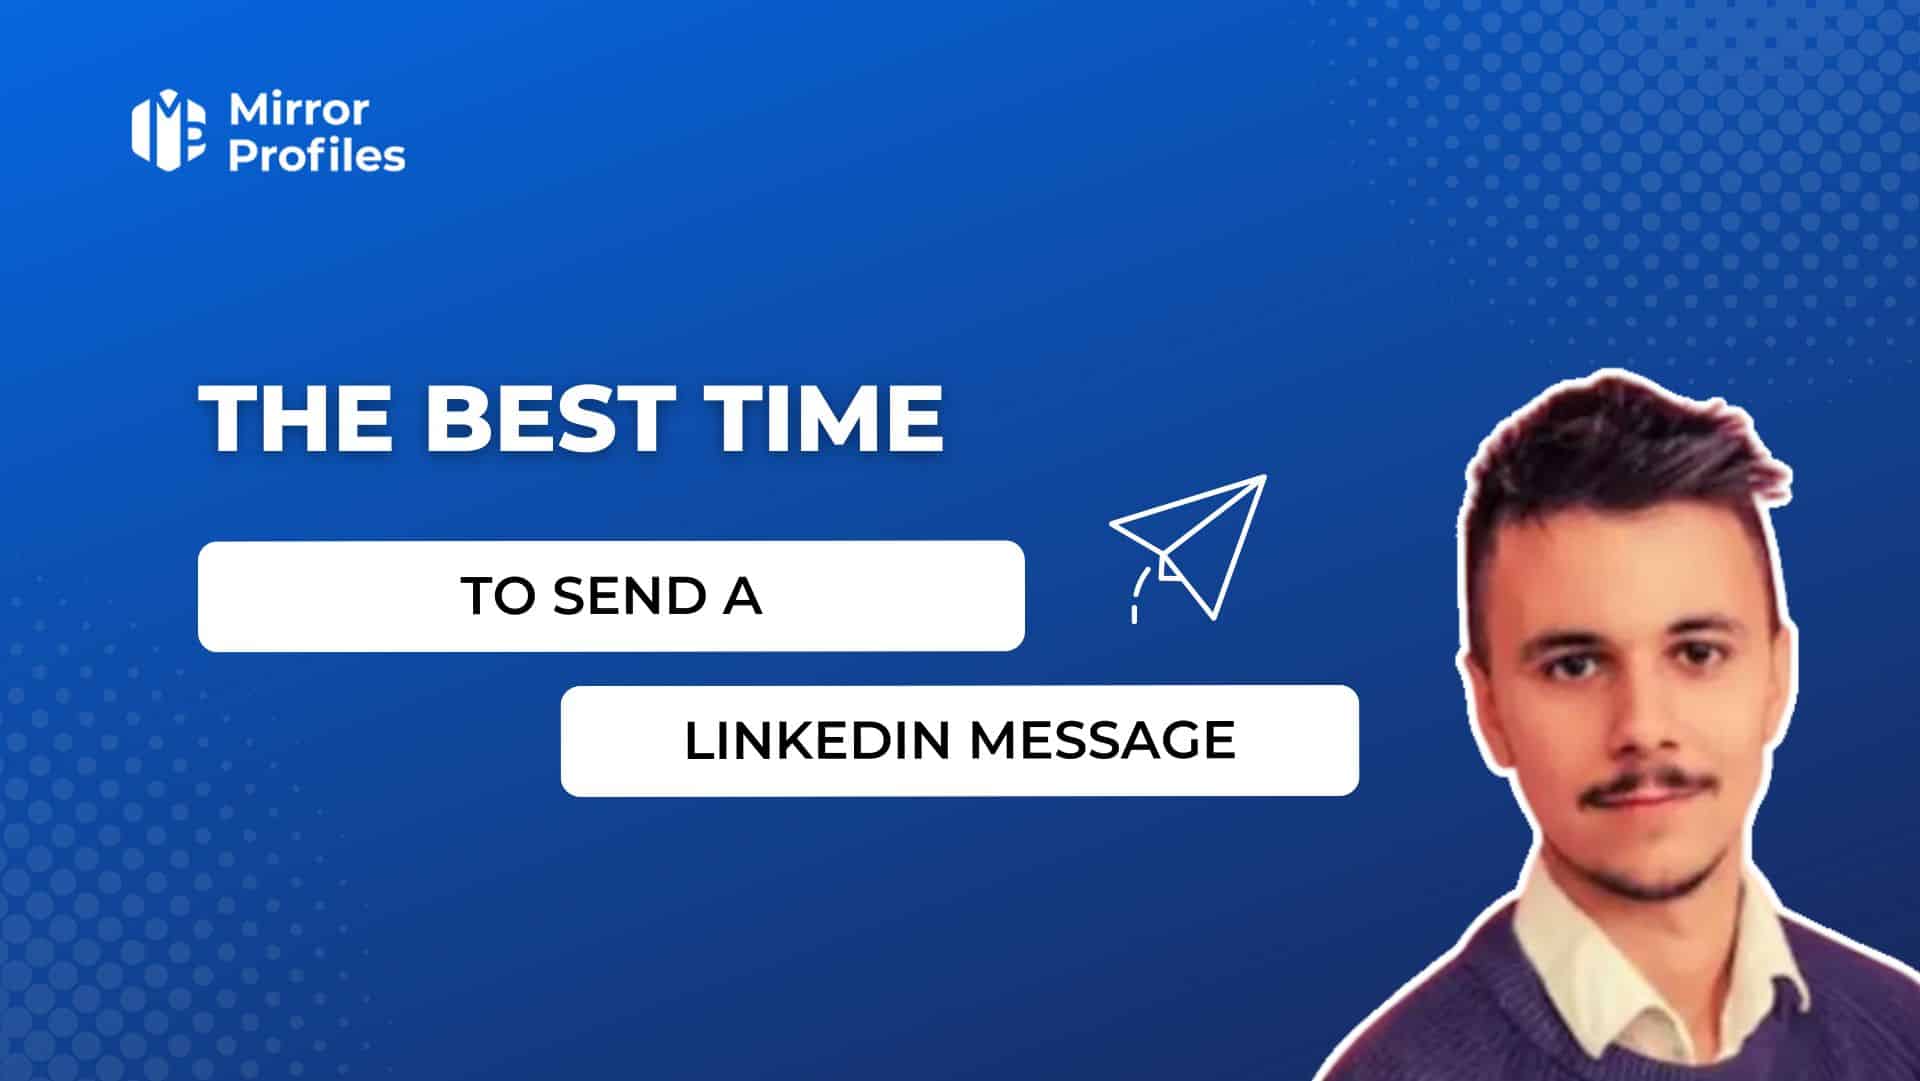 The best time to send a linkedIn message